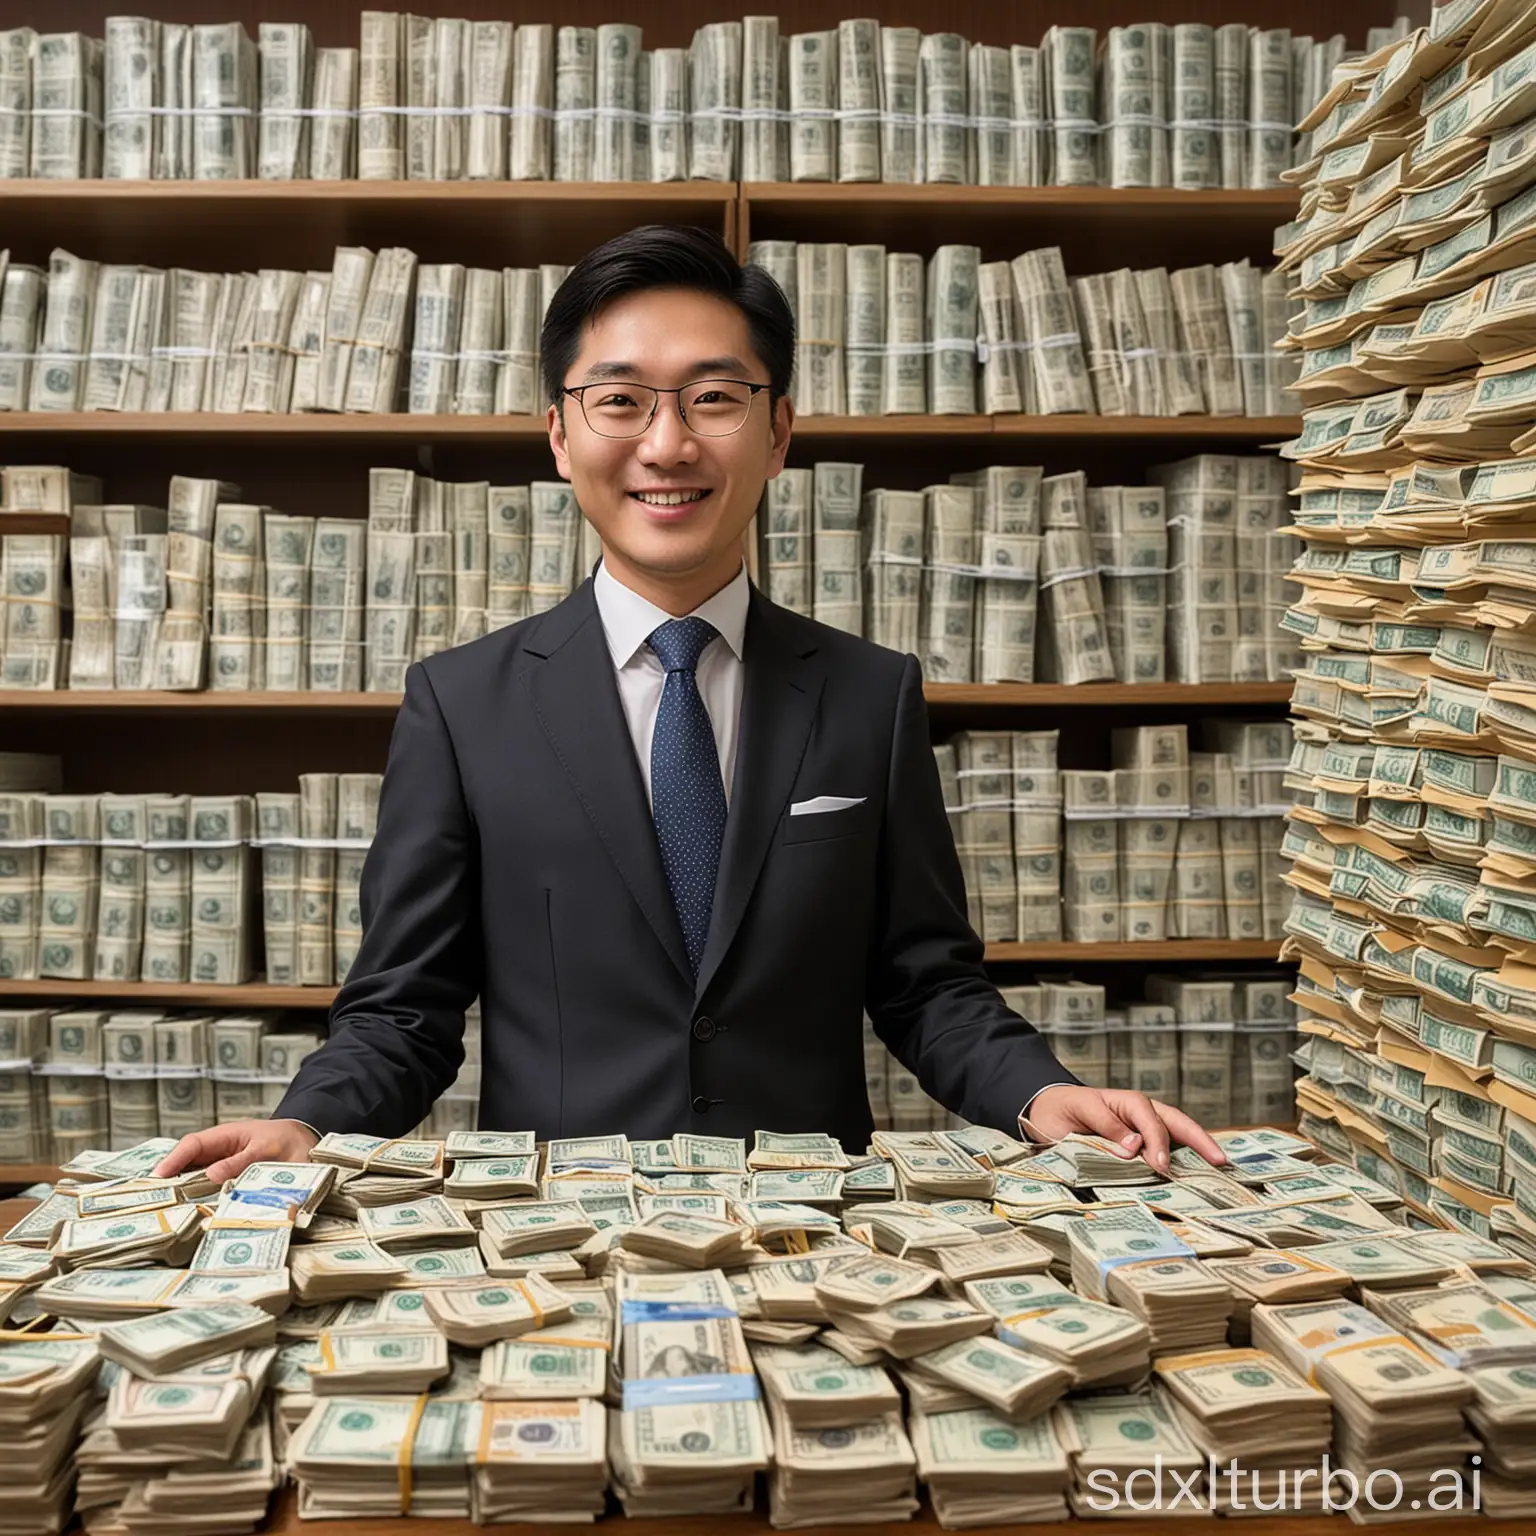 Smiling-Korean-Patent-Attorney-Surrounded-by-Money-in-Singapore-Bank